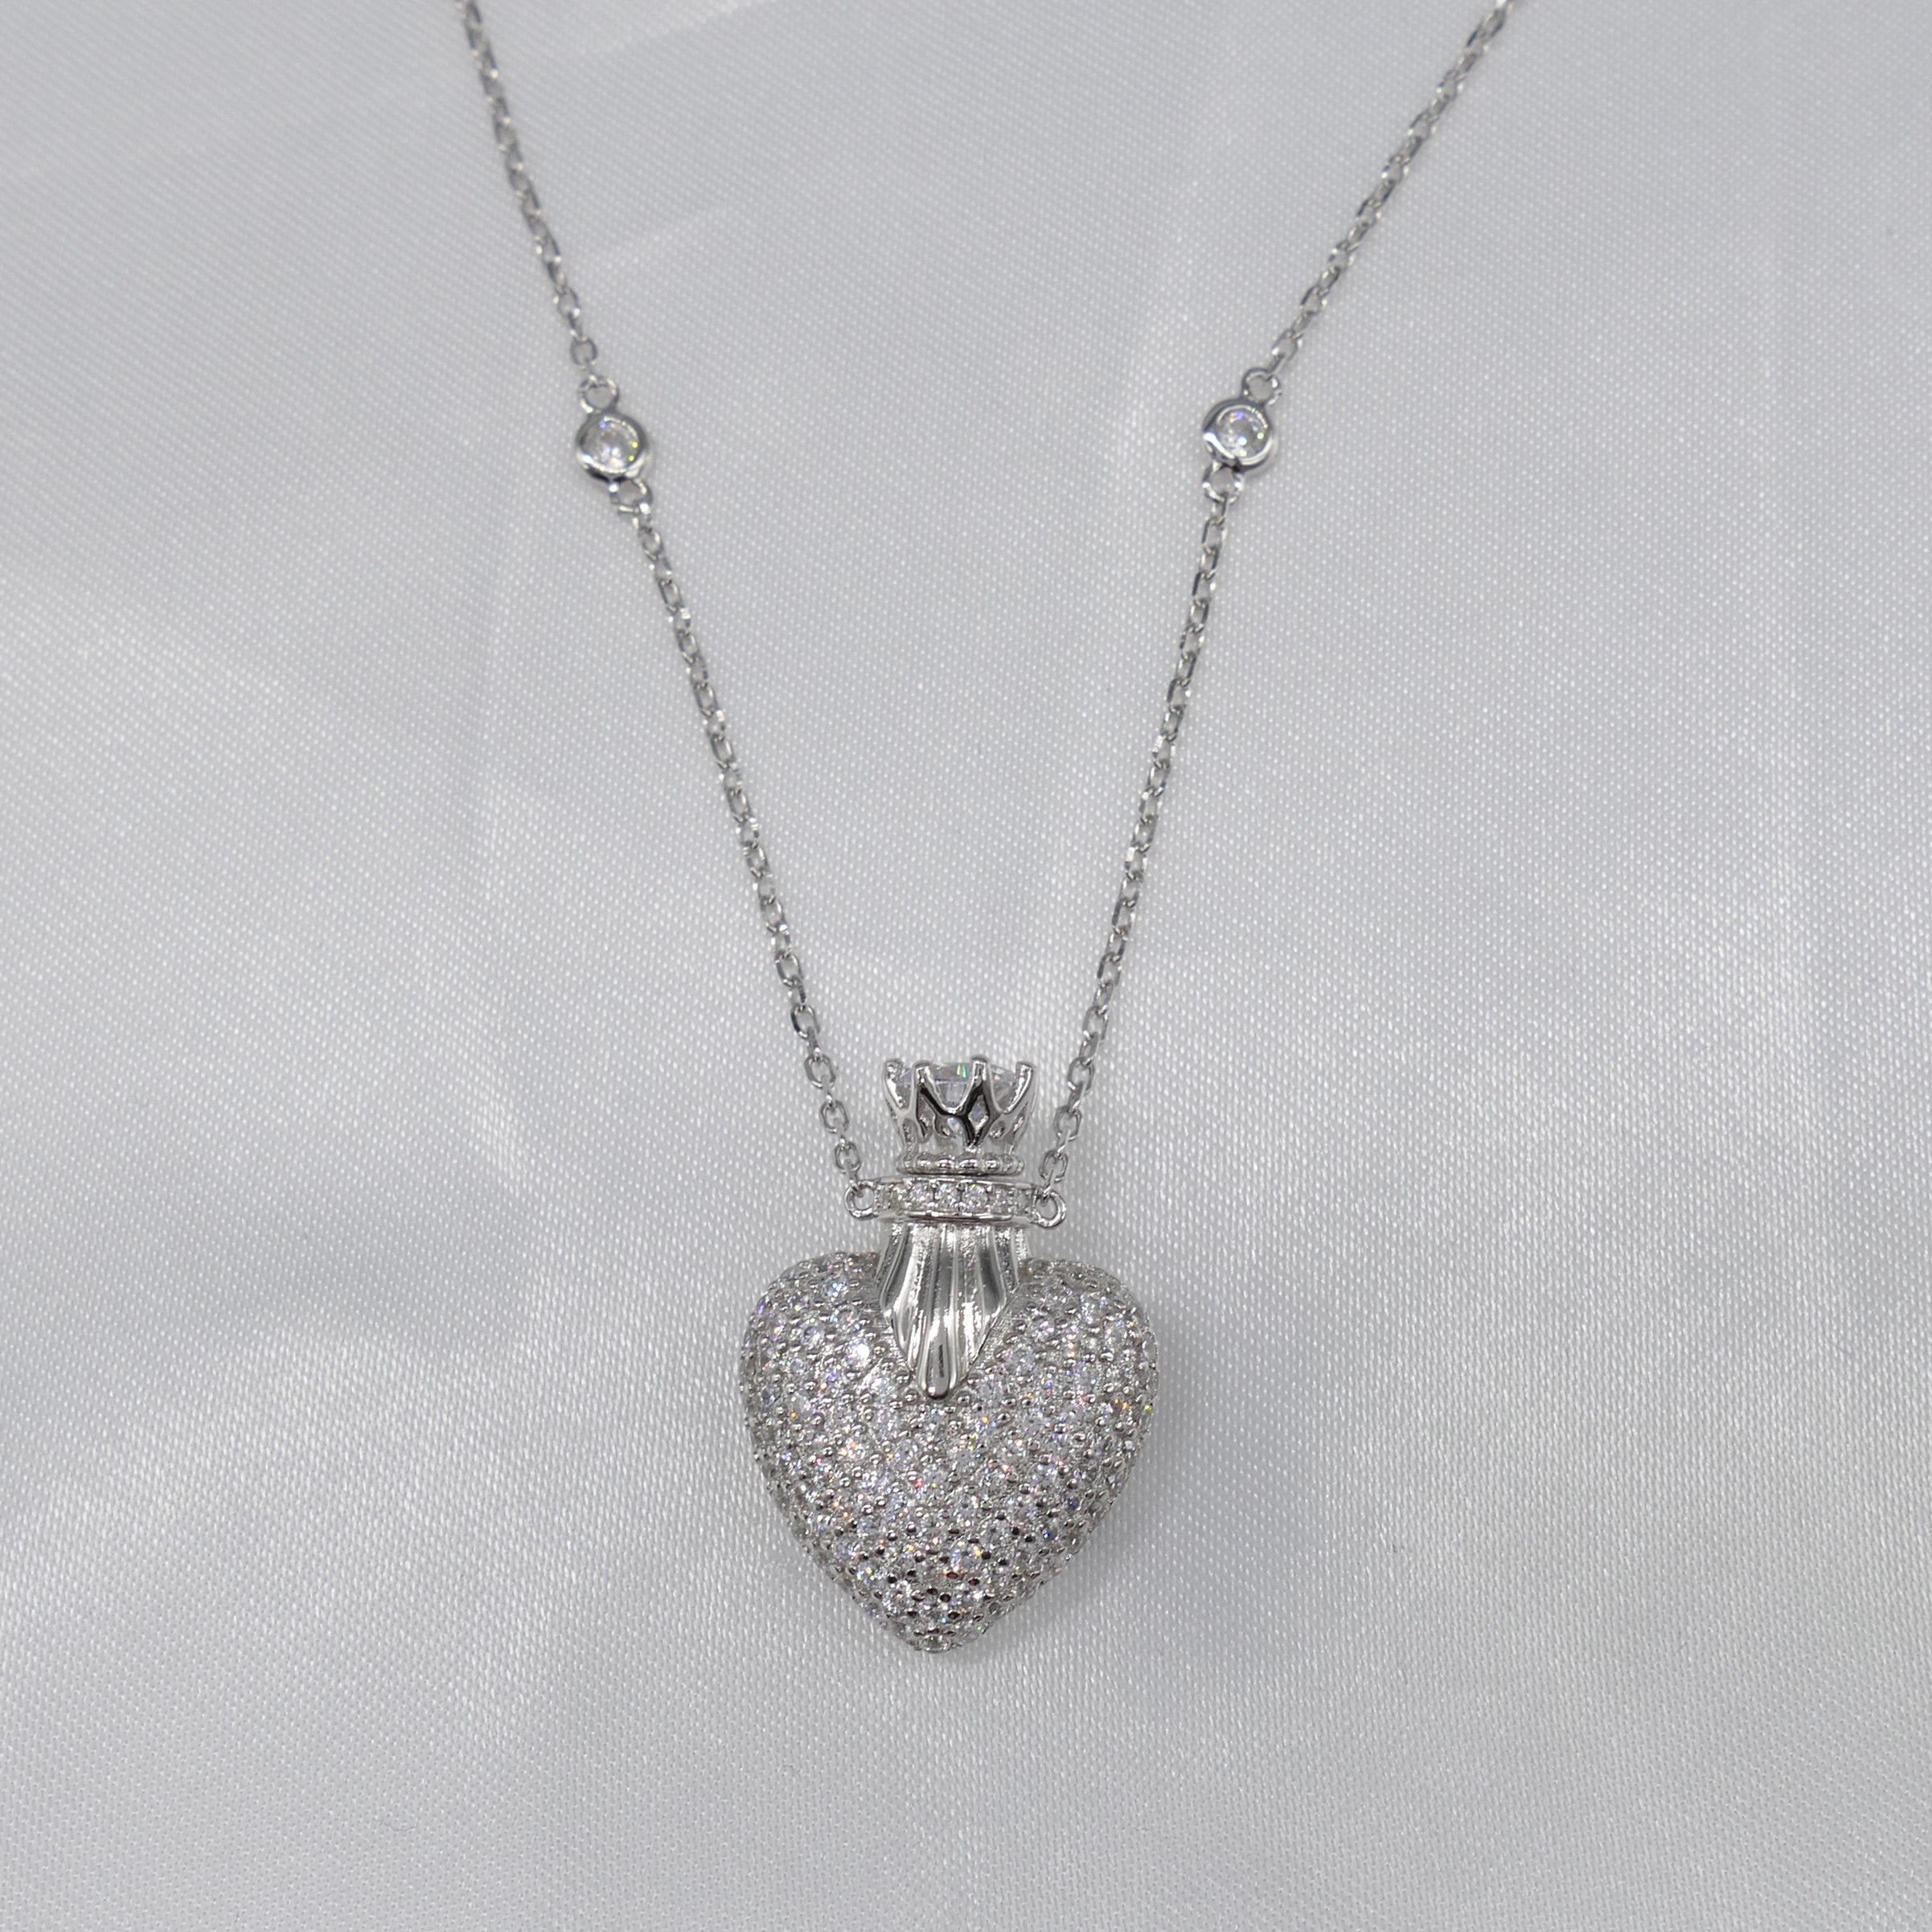 Heart and crown trinket necklace set with multiple stones. - Image 7 of 7